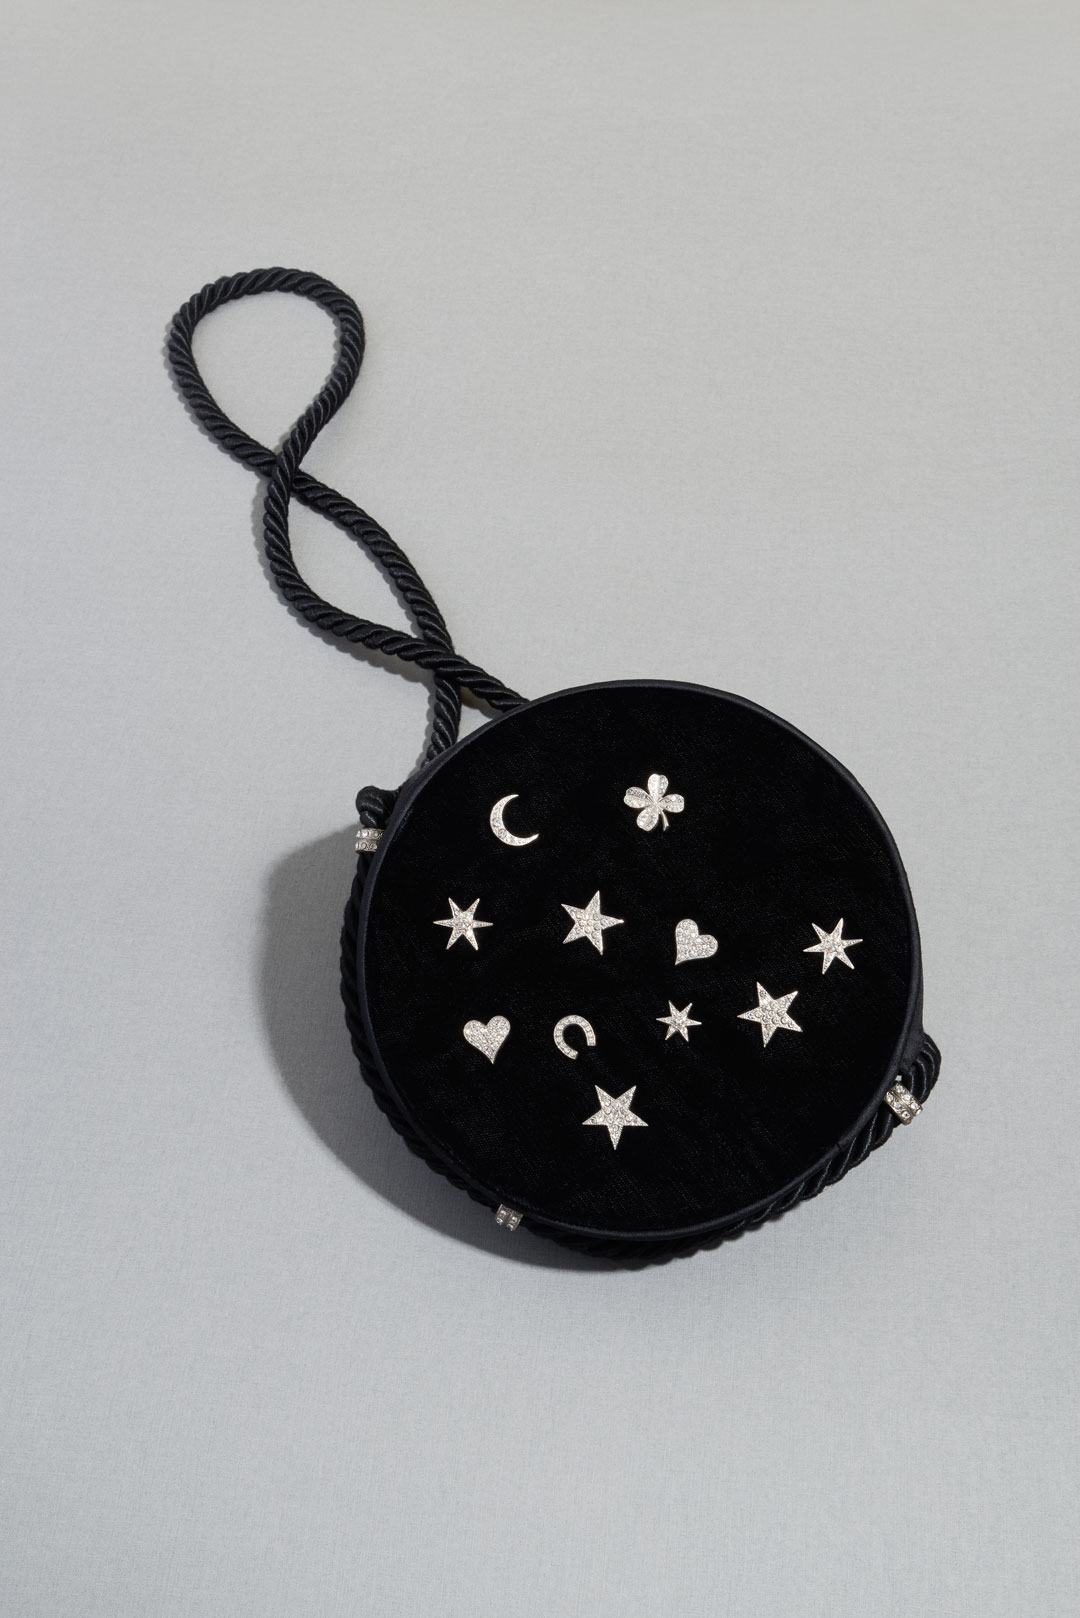 Black velvet tambourine bag with diamanté charms and a black cord strap (made by Renaud), about 1970. Photo by Lavanchy Matthieu